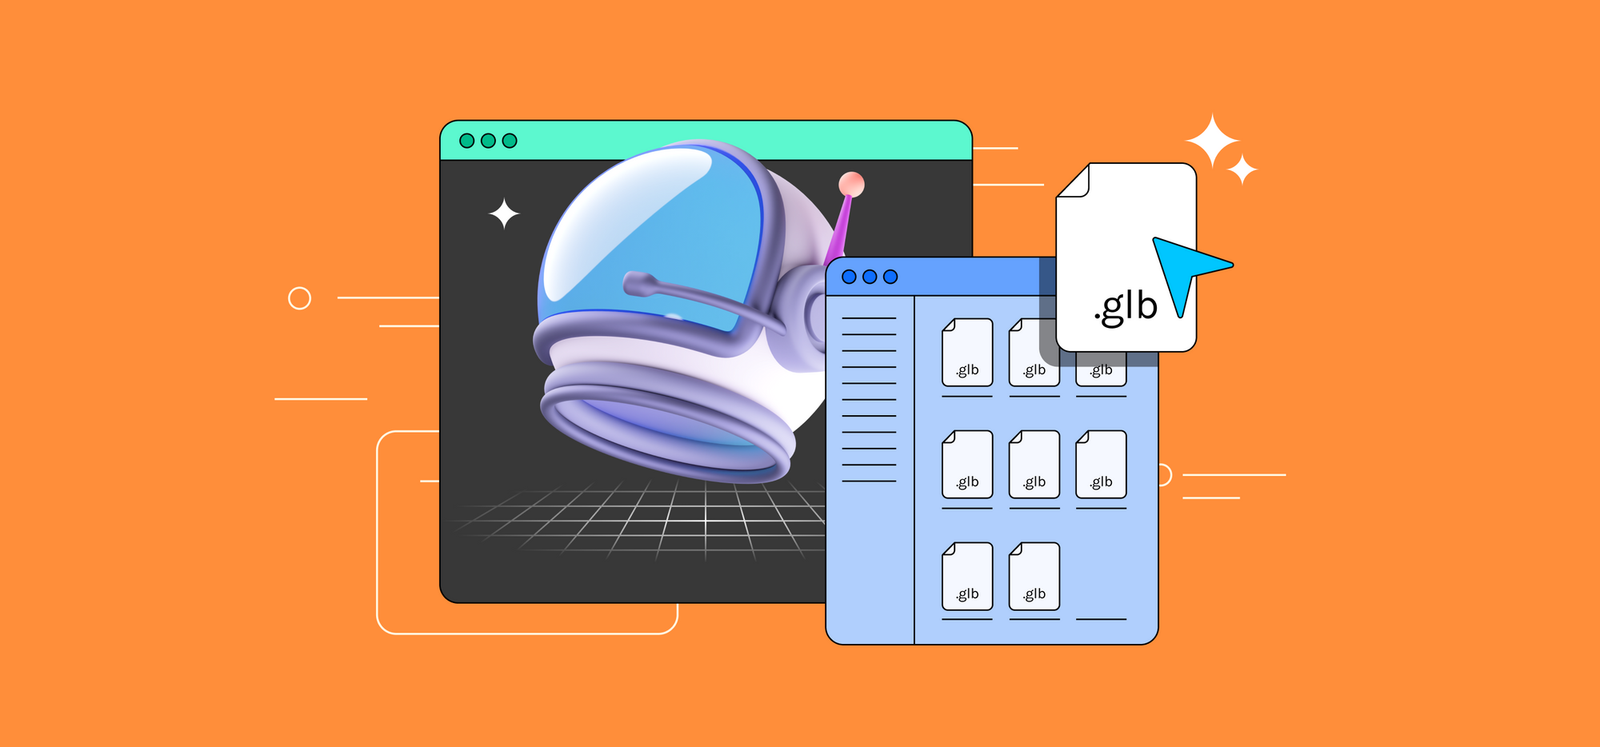 A Step-by-Step Guide to Exporting glTF Files From Blender